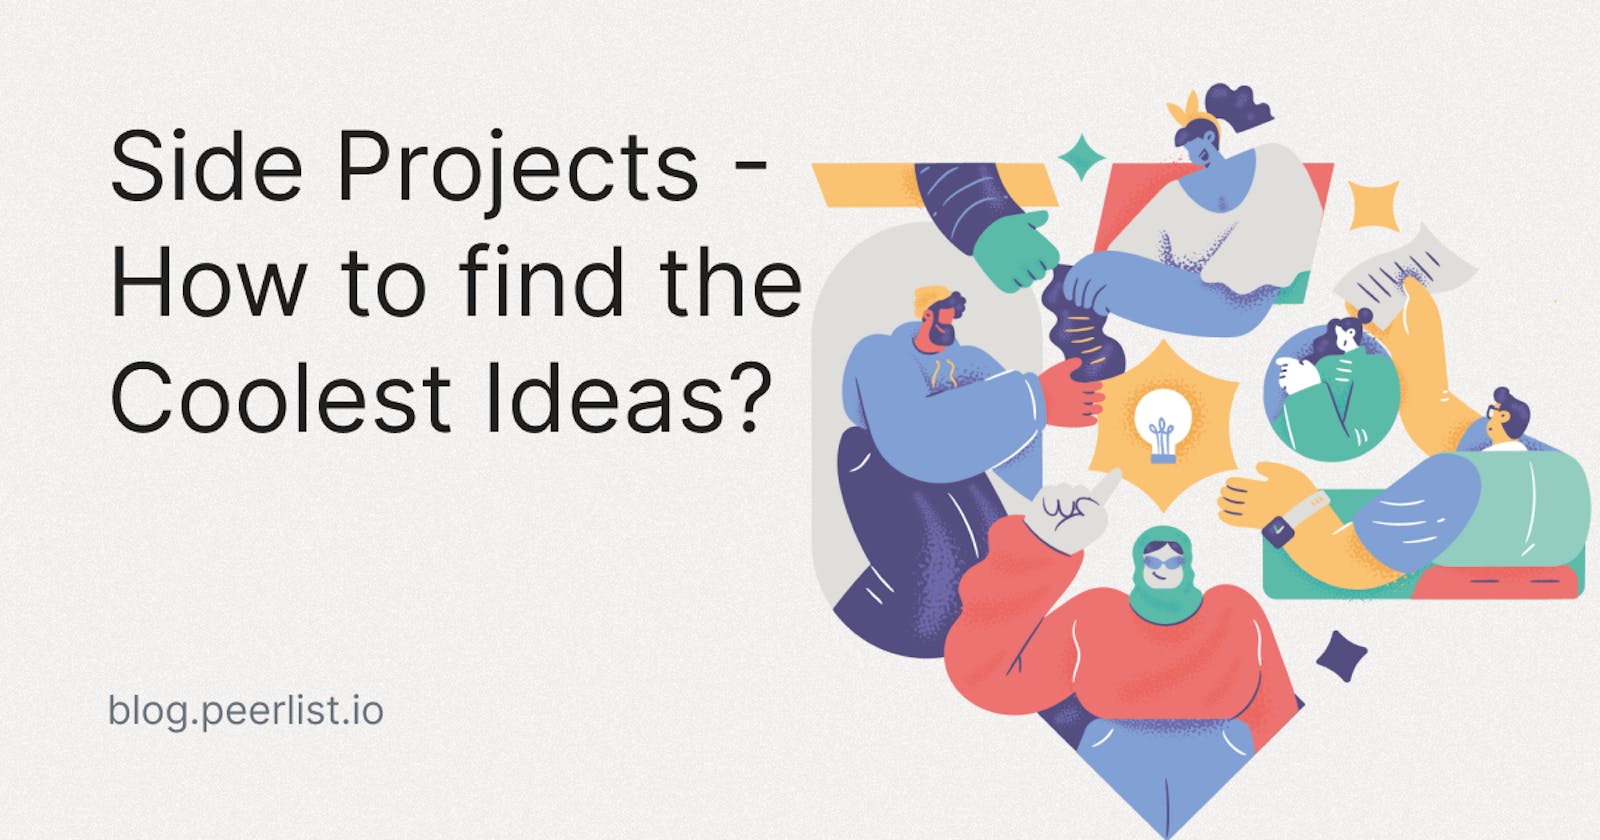 Side Projects - How to find the Coolest Ideas?